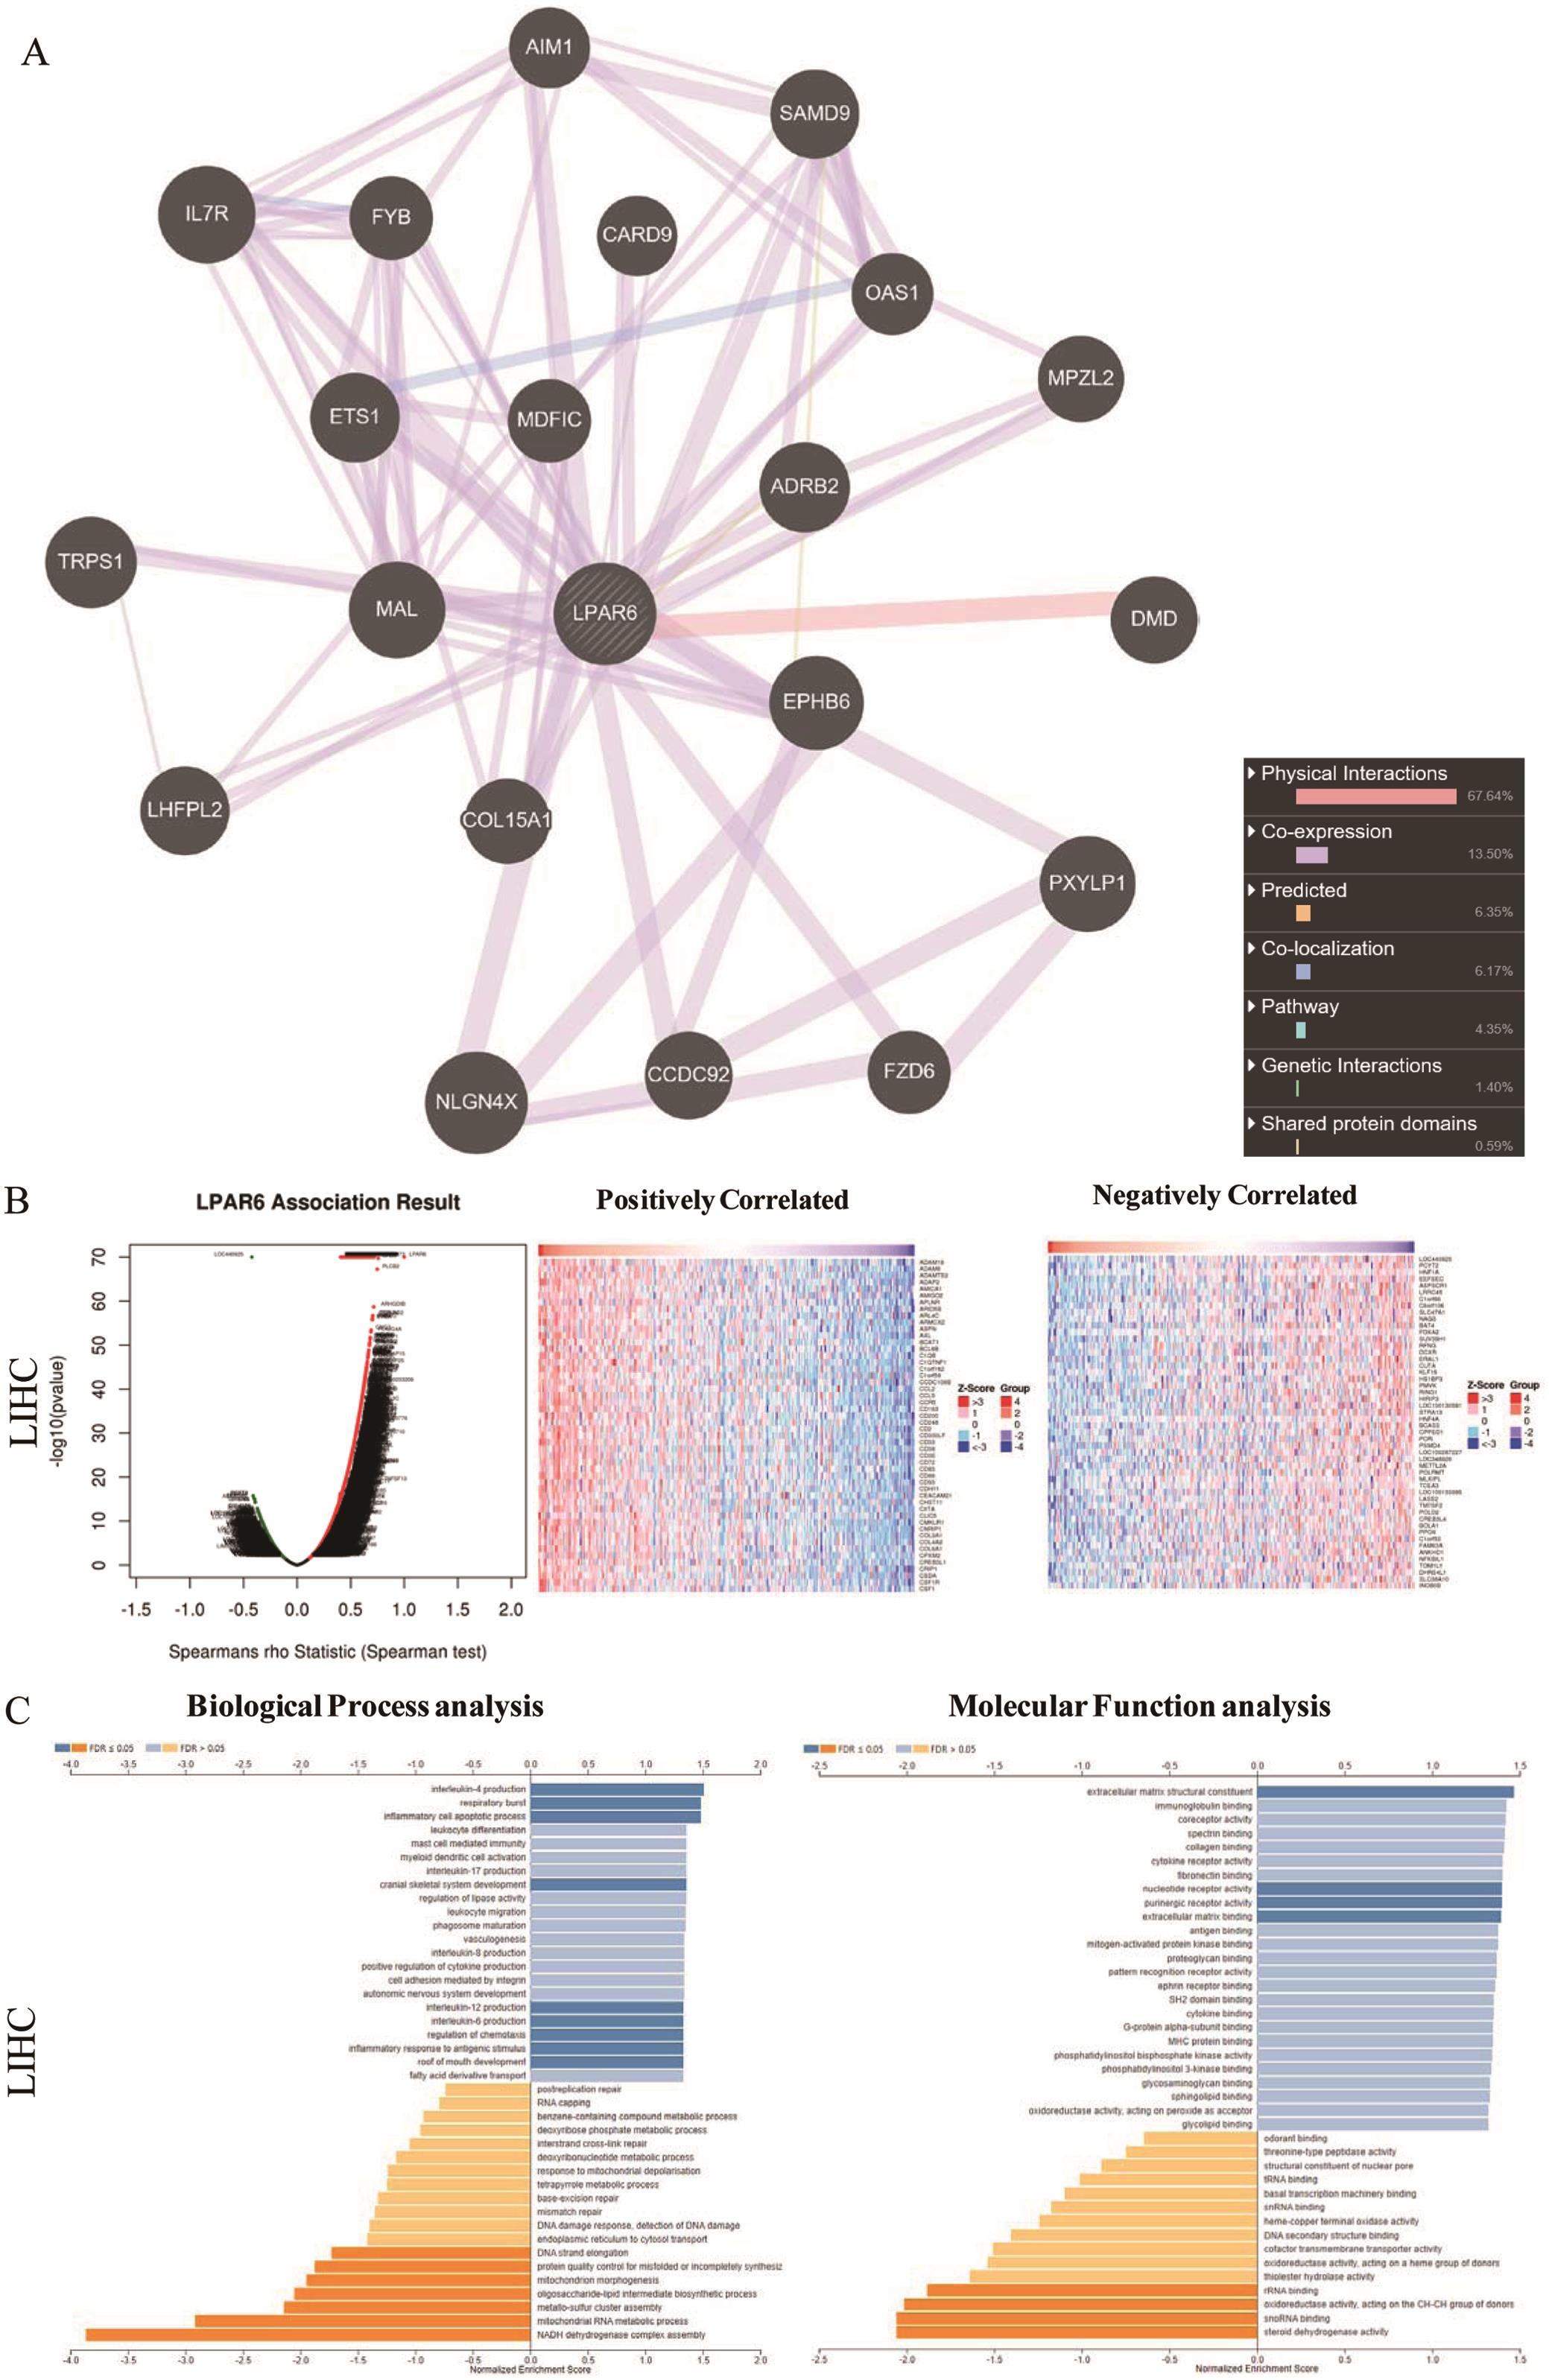 Biological interaction network and enriched gene ontology annotations of LPAR6 correlated genes in LIHC.